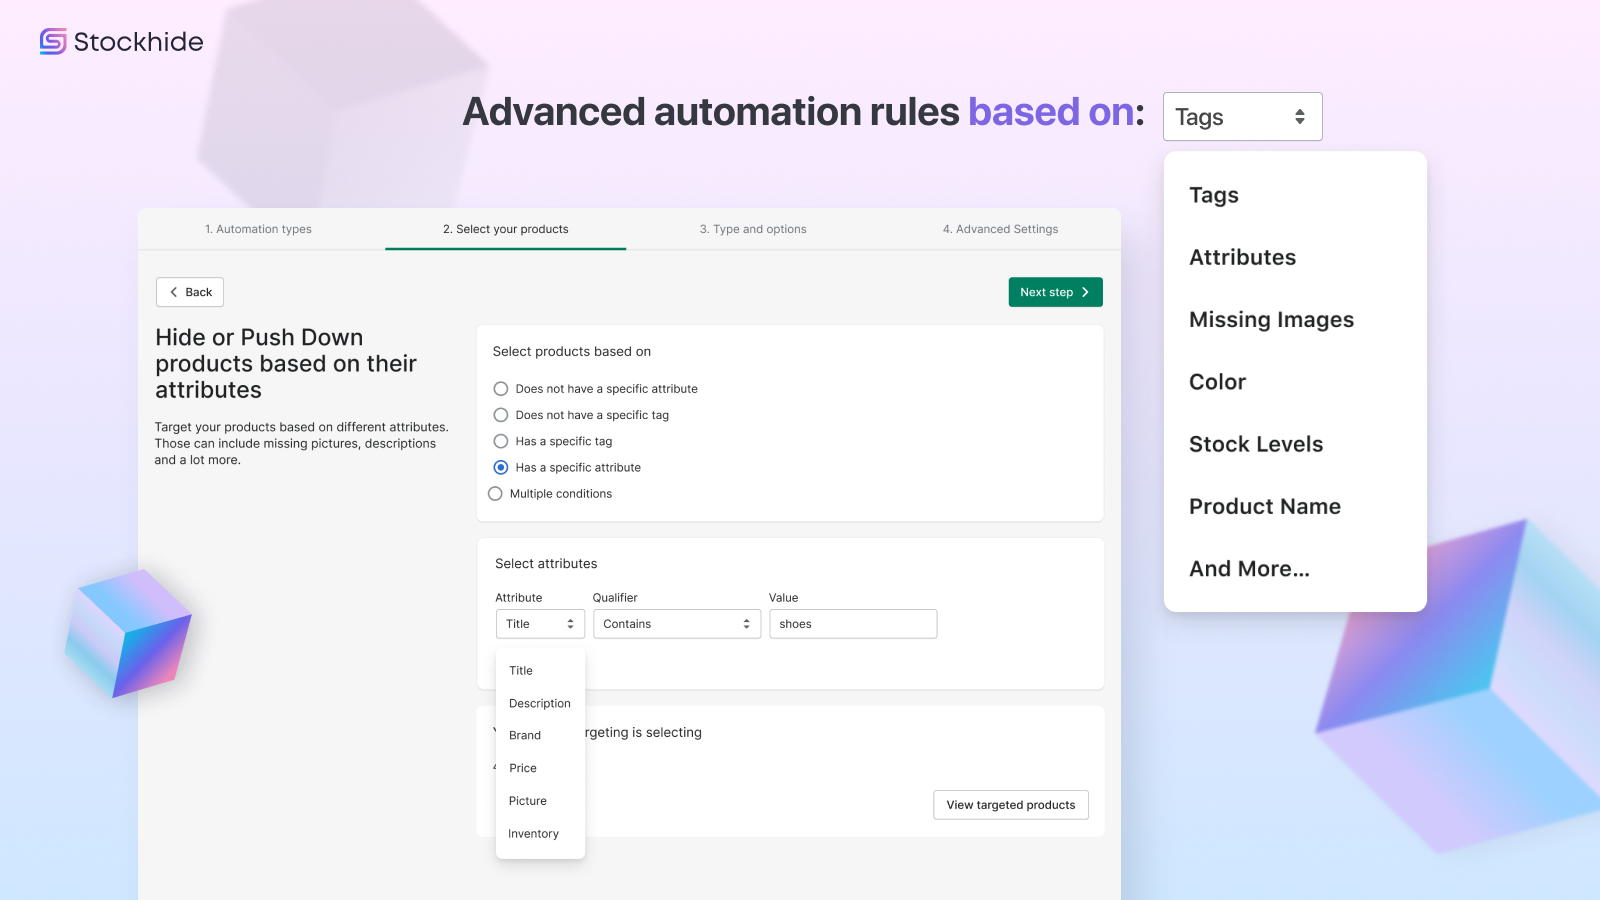 Advanced automation rules based on many attributes